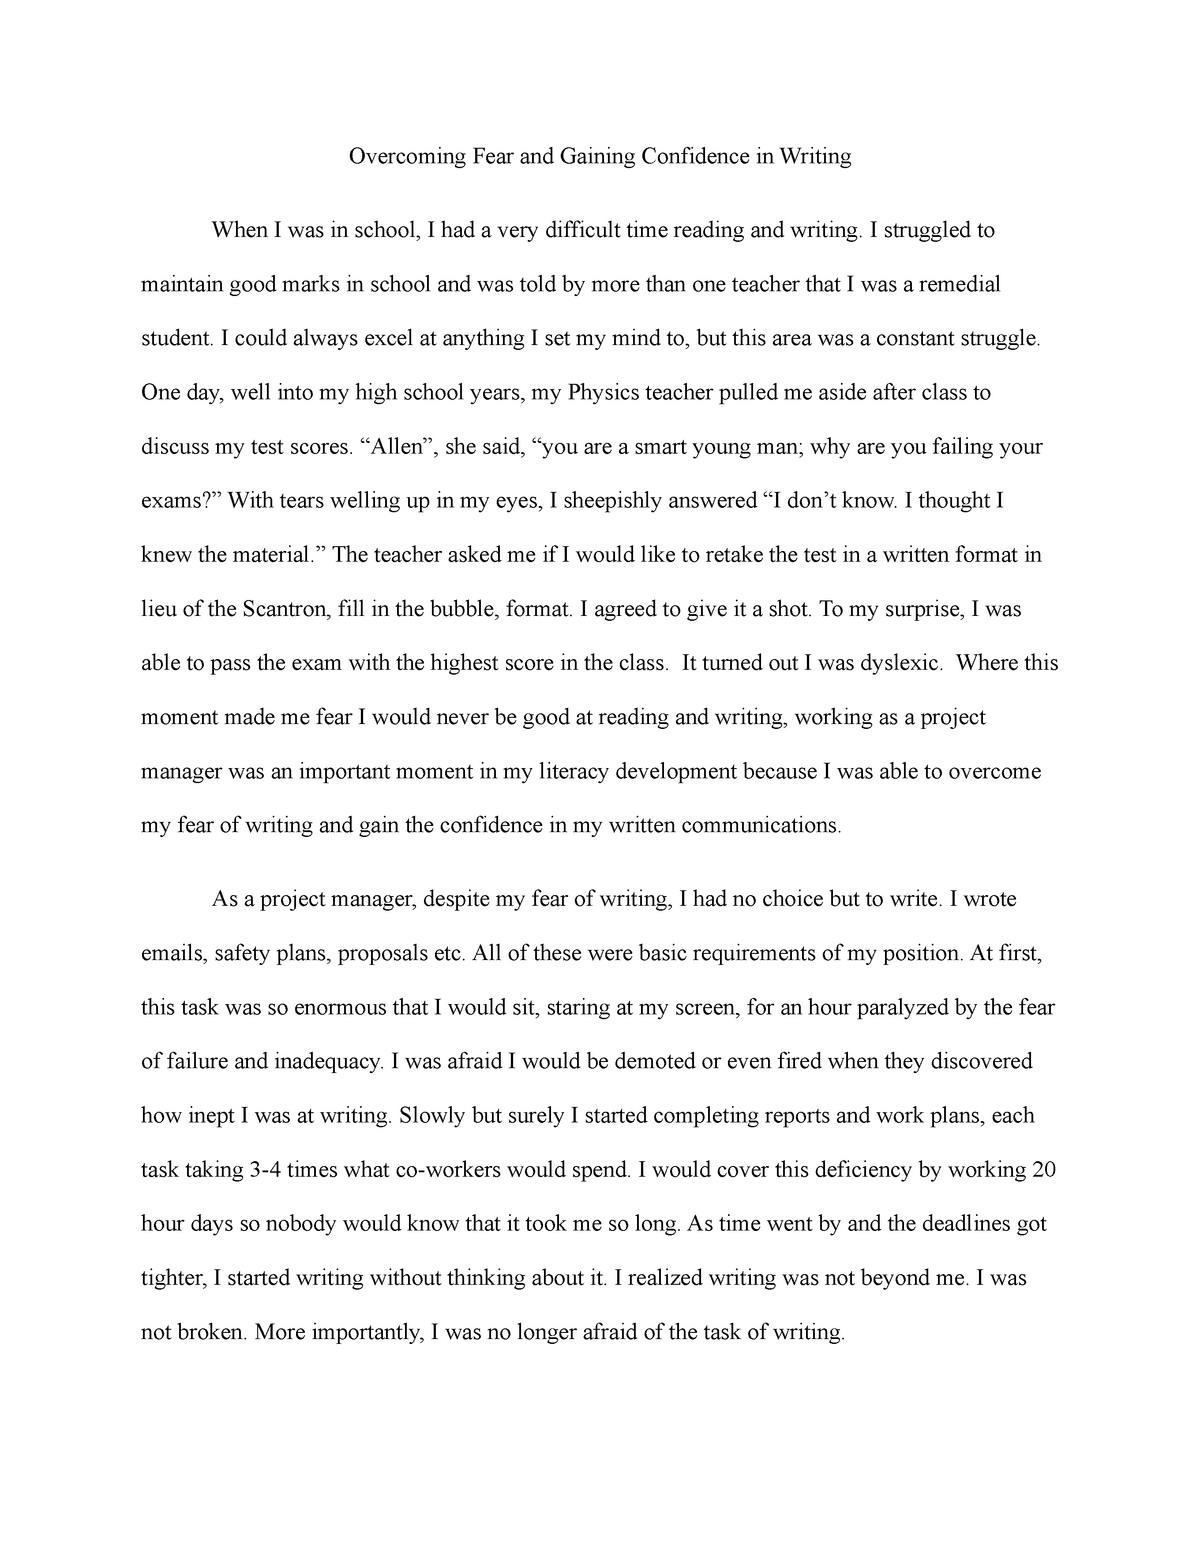 overcoming fear essay conclusion